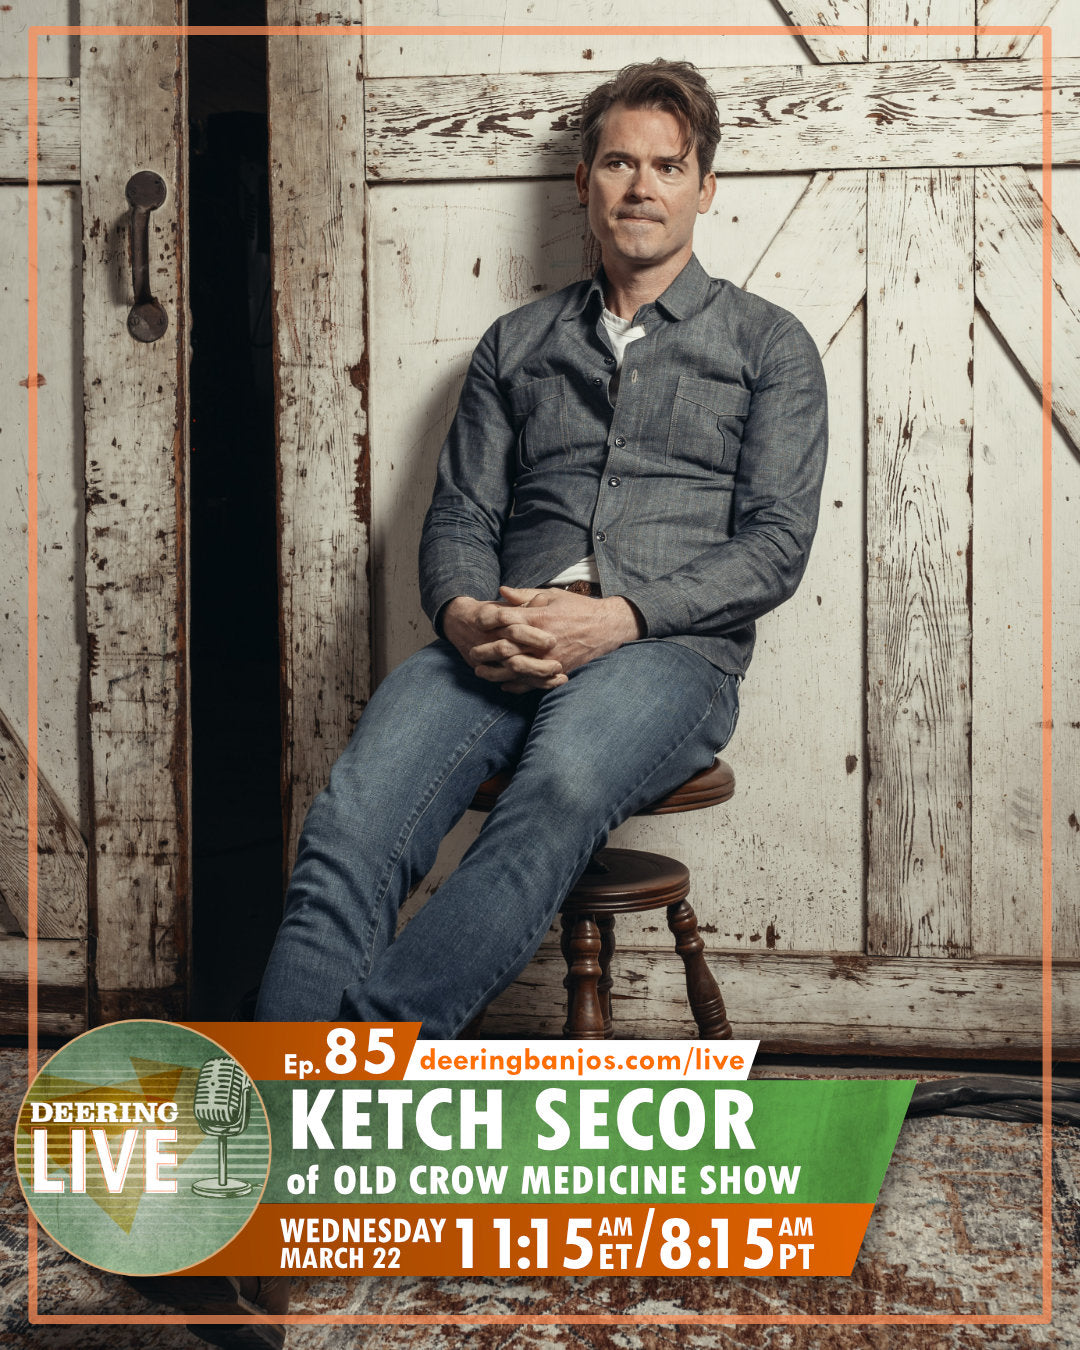 Ketch Secor of Old Crow Medicine Show On Deering Live